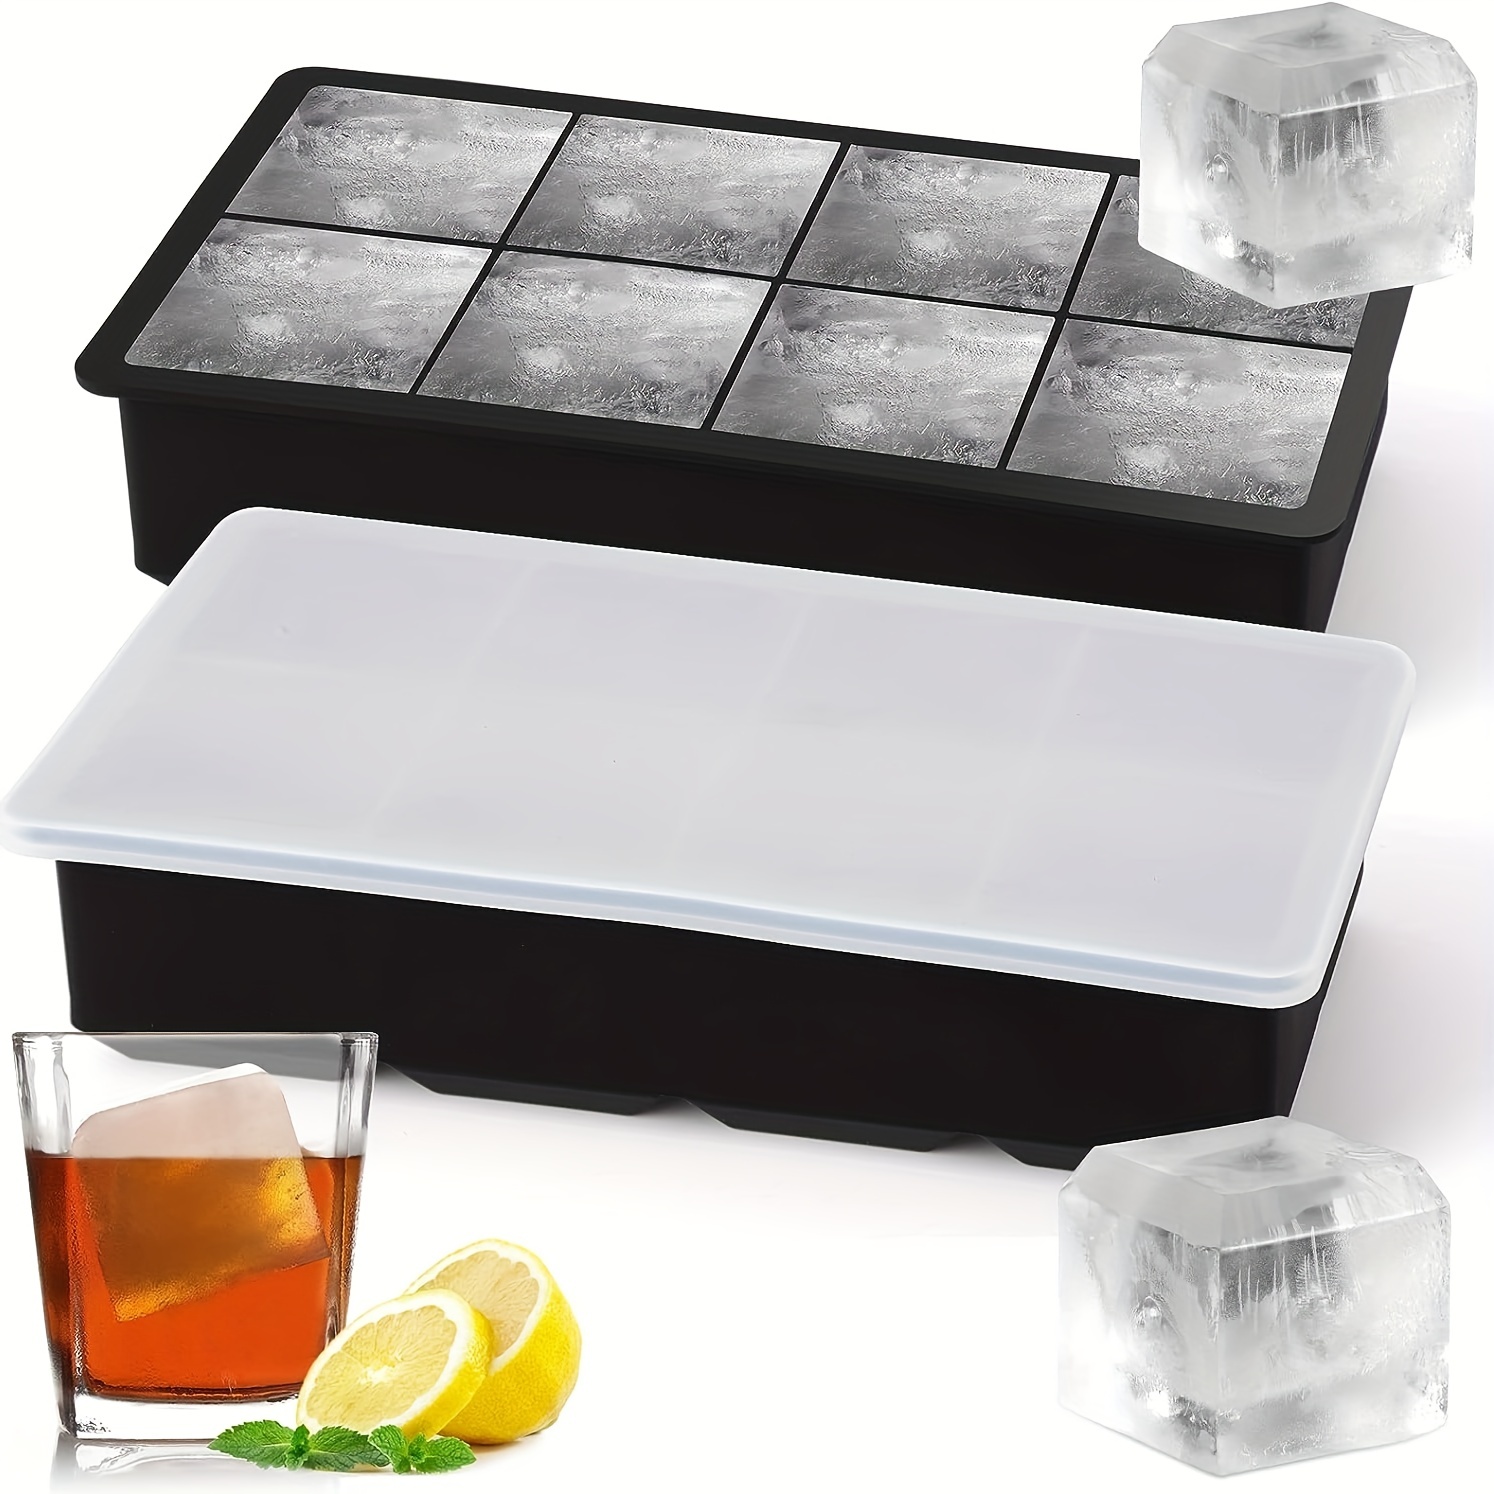 Stainless Steel Ice Mold 6 Grid Food Grade Ice Cube Square Tray Mold DIY  Bar Ice Block Maker Ice Tray Box Mould - AliExpress